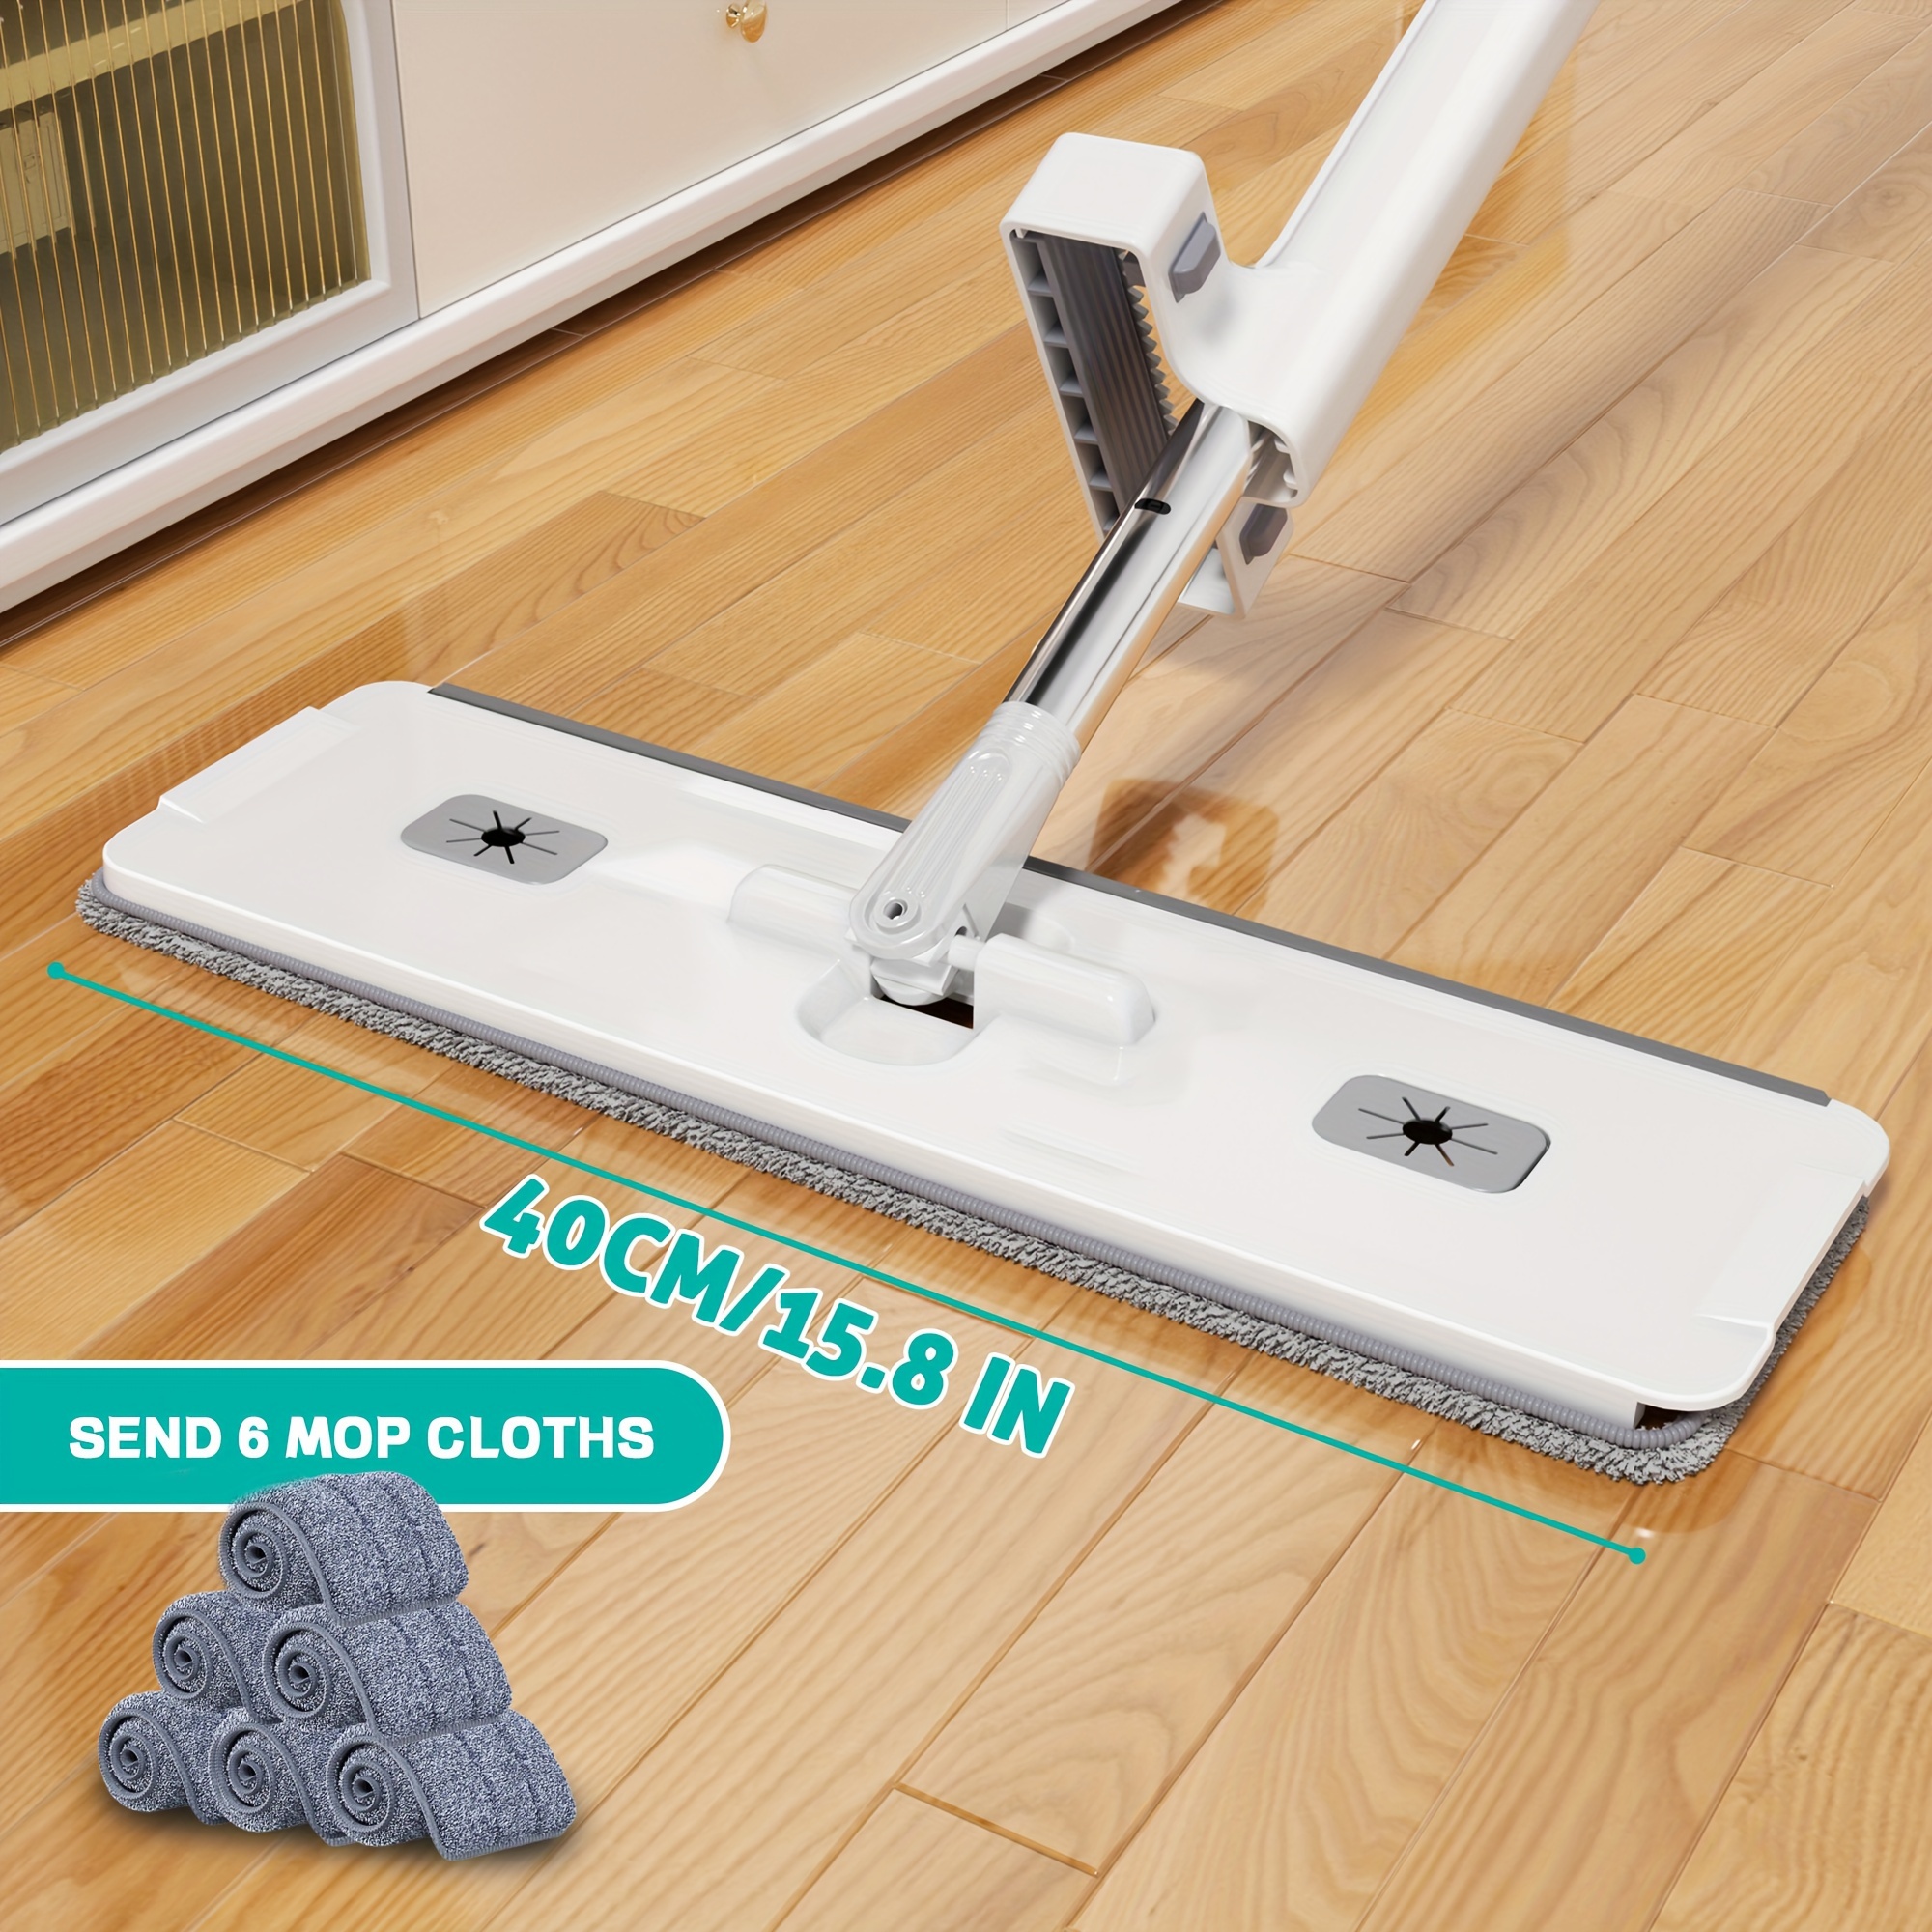 Extended No-hand-wash Flat Mop With 3 Microfiber Mop Pads For Lazy